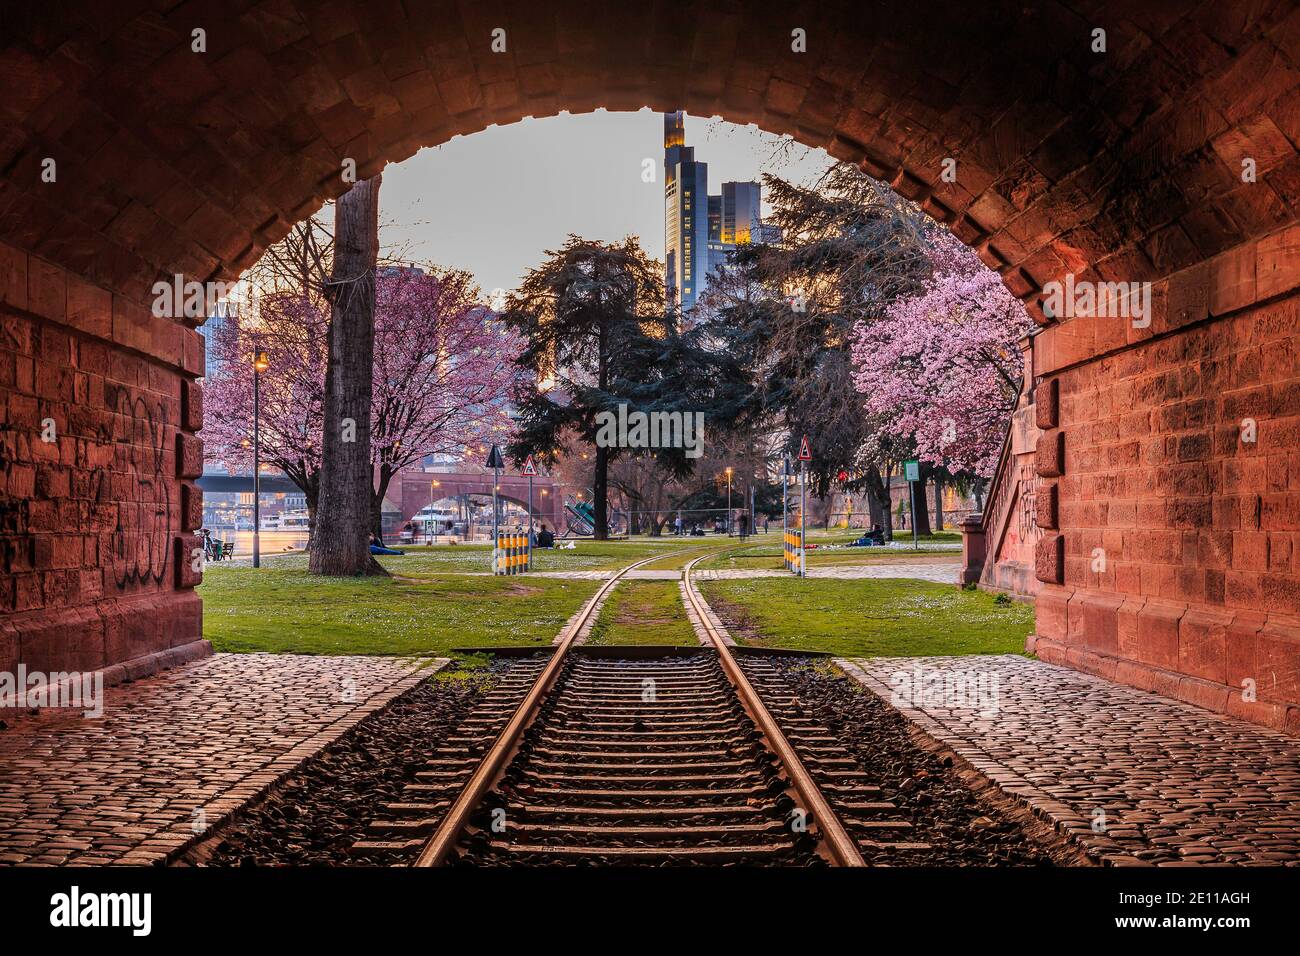 Railway tunnel with an old track through a park on the banks of the Main. Frankfurt skyline with skyscrapers in the background in the evening. Violet Stock Photo